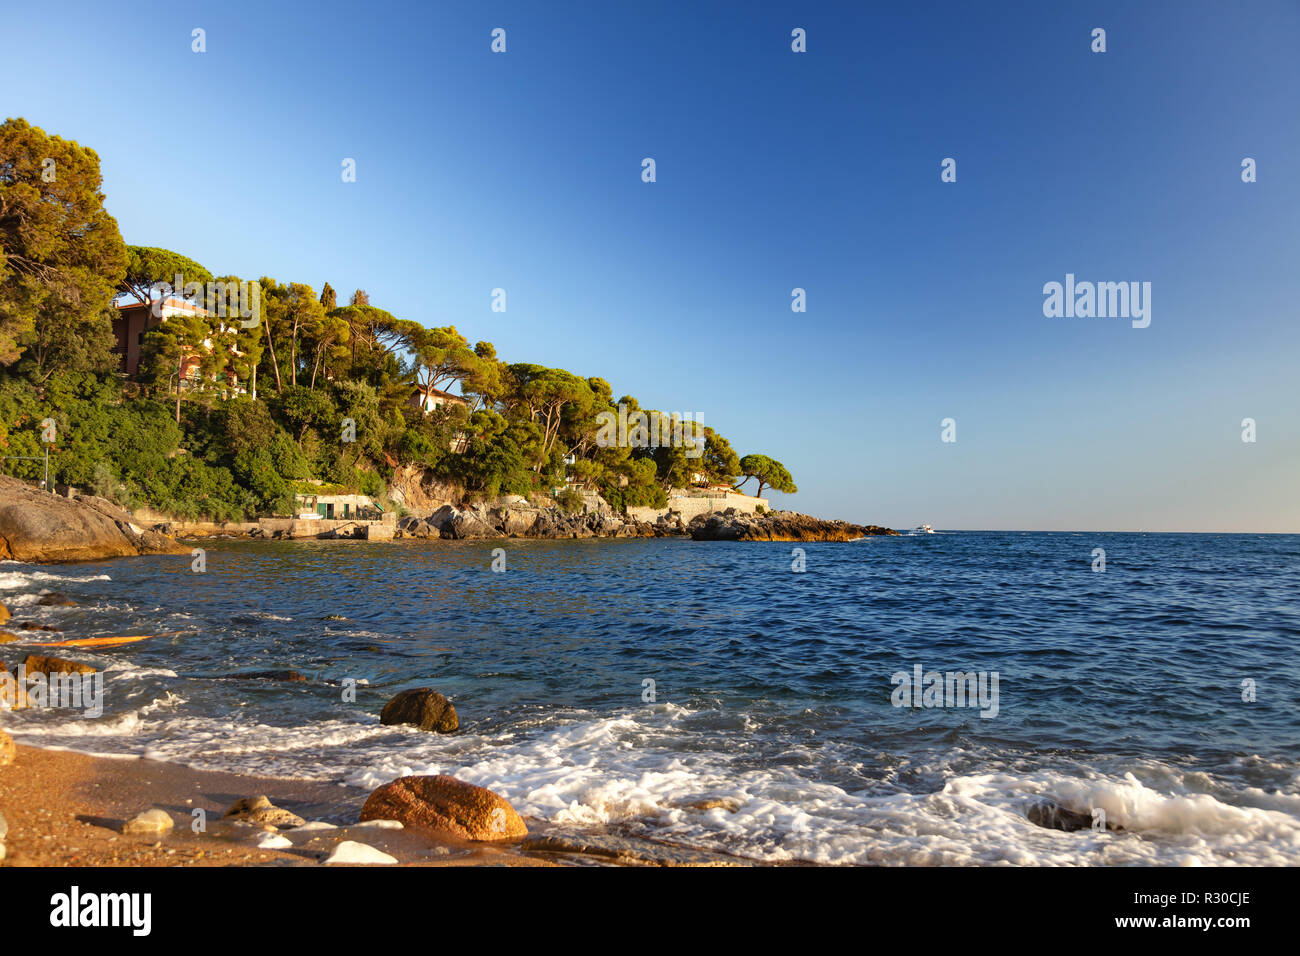 Lerici, Cinque Terre Liguria, Italy - August 15, 2018 - Coastal view from the beach Stock Photo